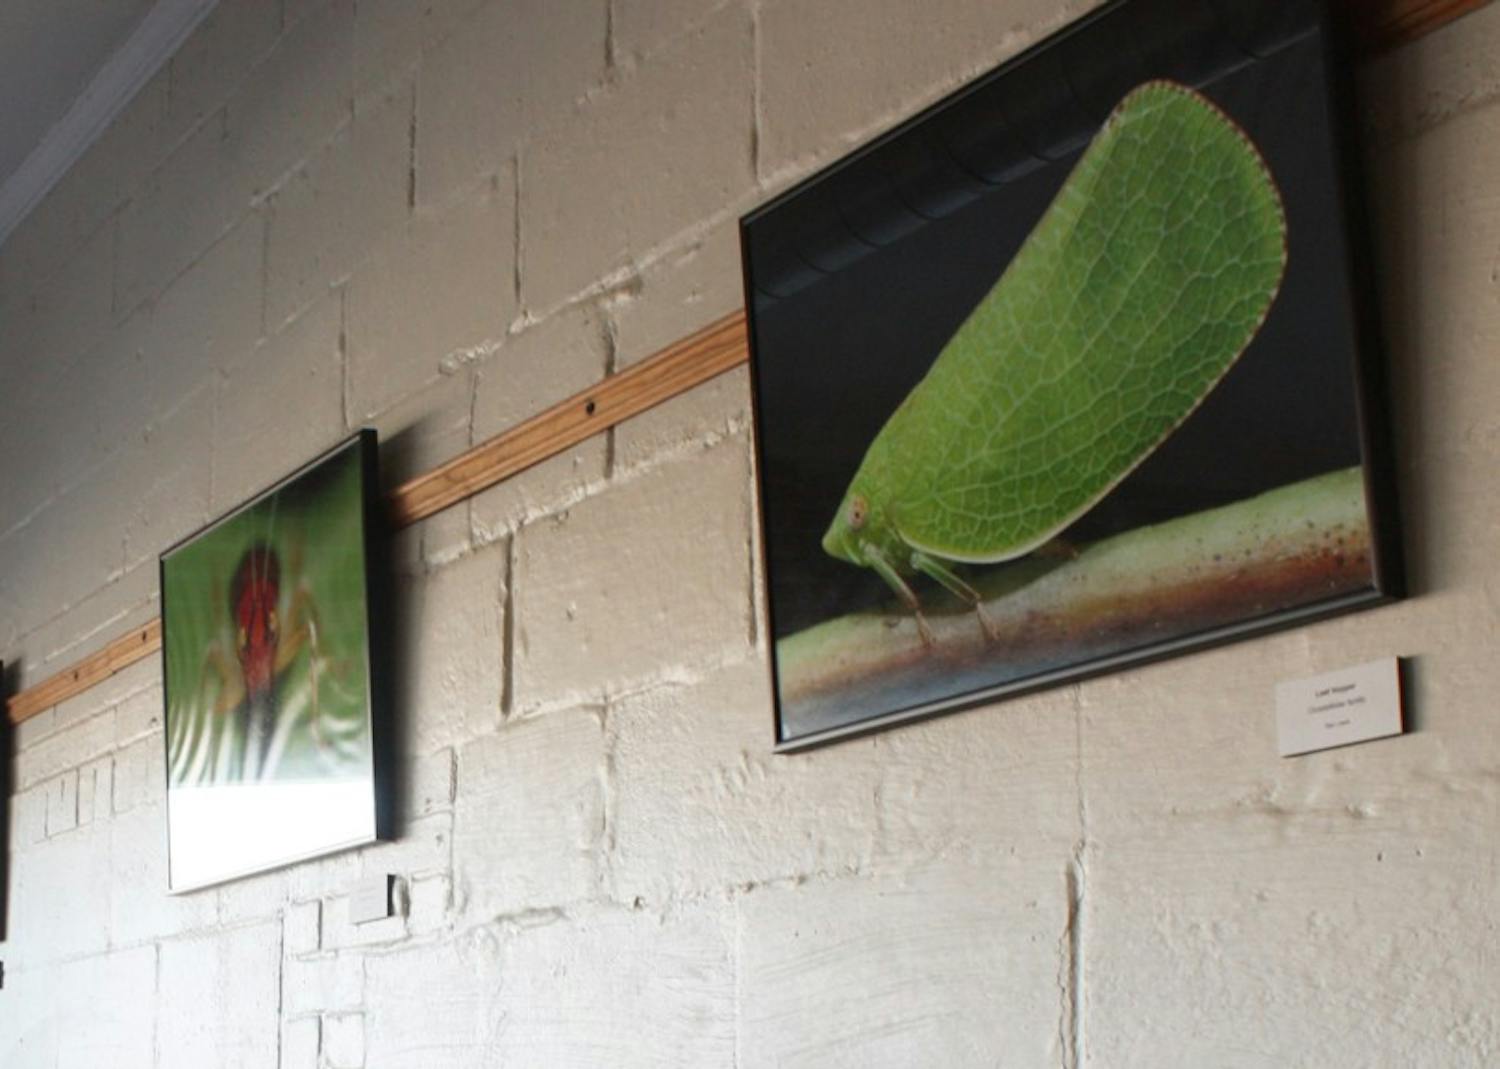 Nature photographs by artist Stan Lewis are displayed at Open Eye Café in Carrboro.   As a part of its mission, the cafe regularly features the work of local artists on its walls.